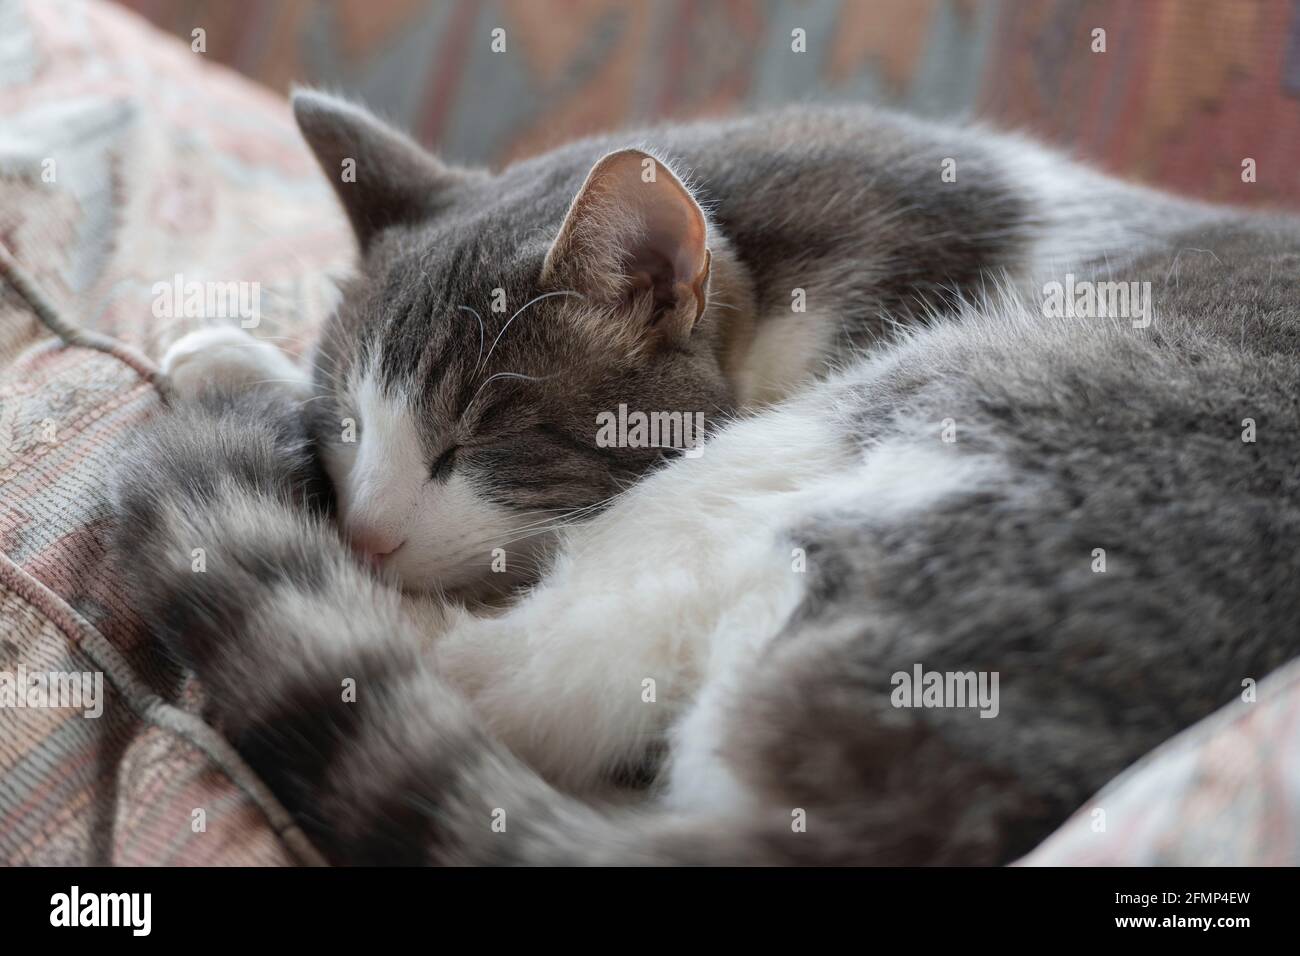 A Grey and White Tabby Cat Sleeping on the Back Cushion on a Sofa Stock Photo